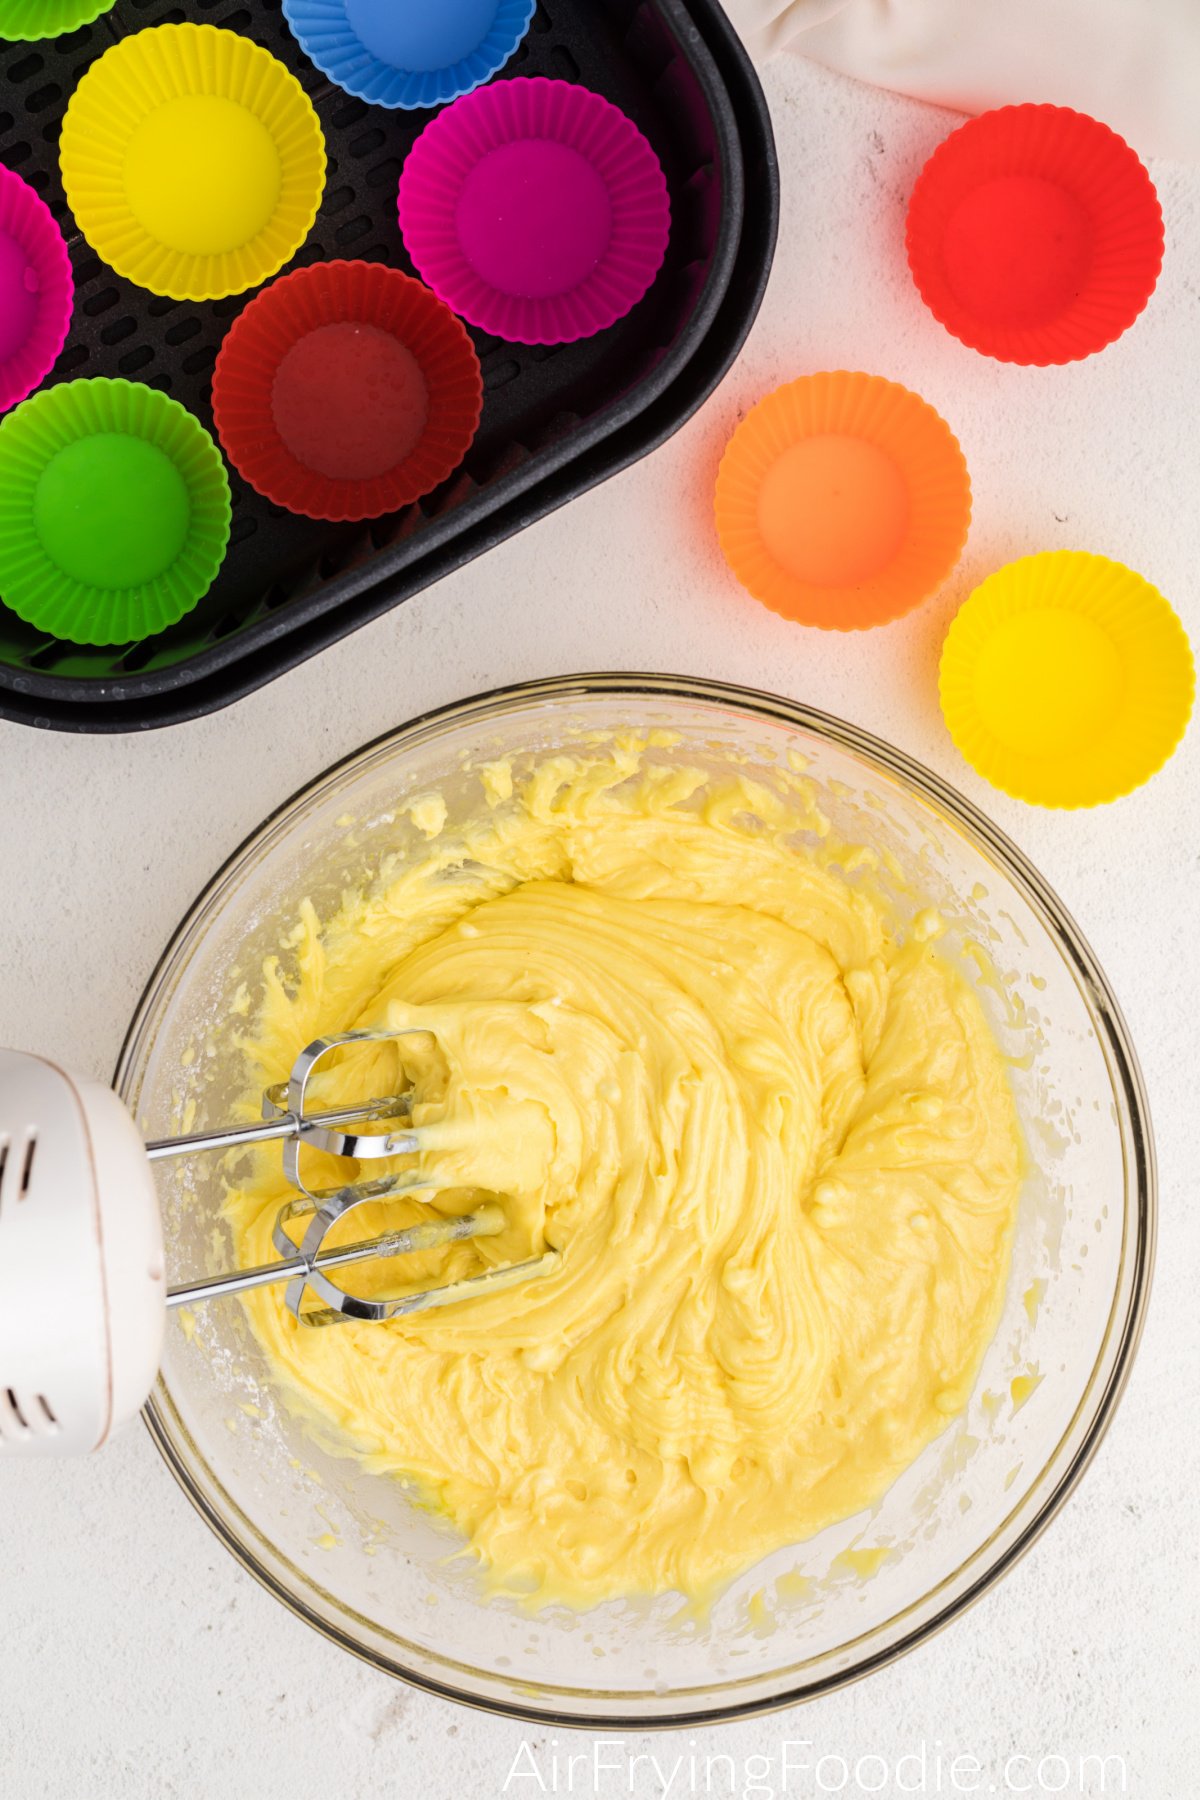 Ingredients mixed in a mixing bowl with a hand mixer and air fryer basket with silicone cups.